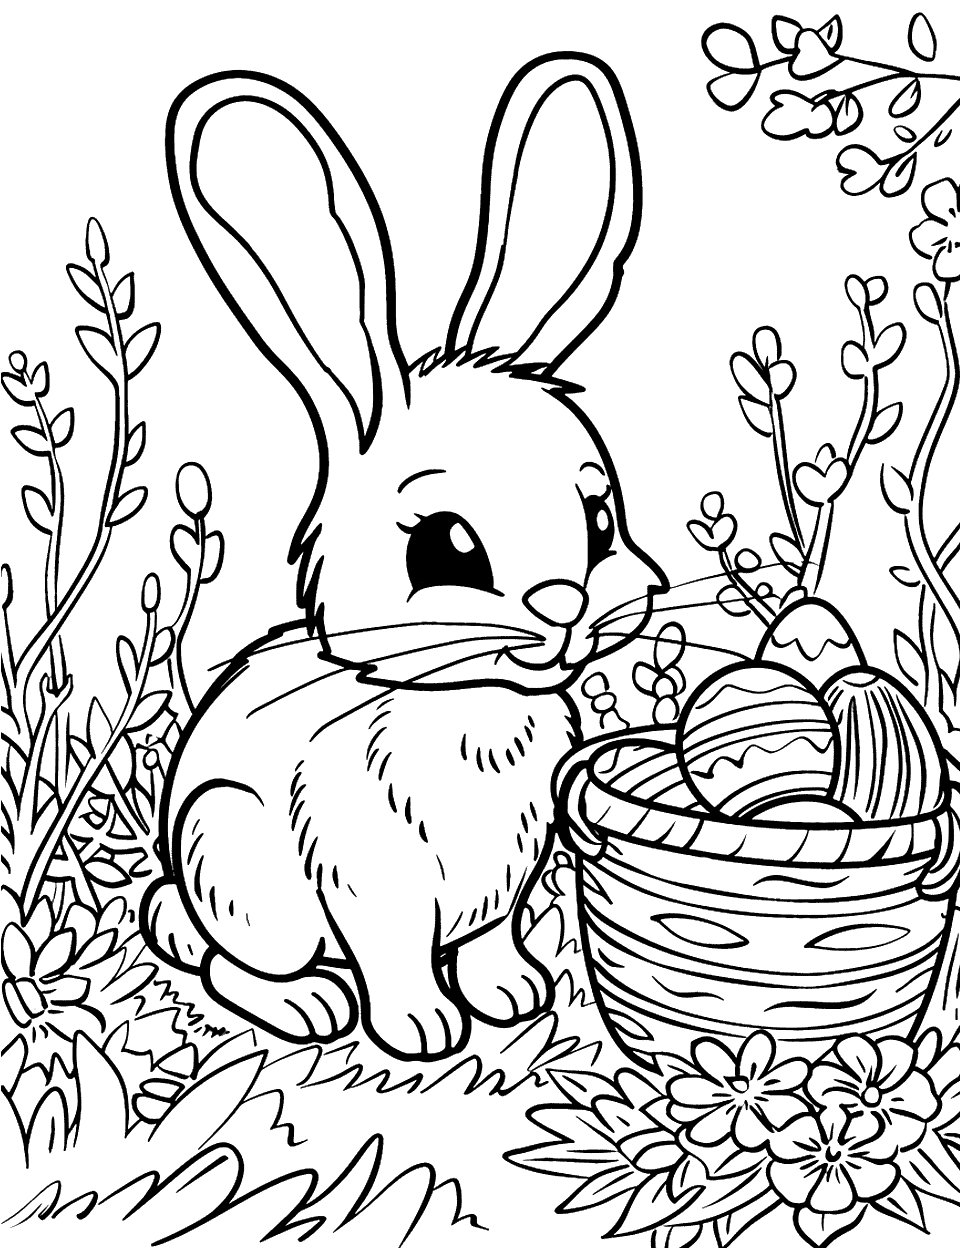 Bunny's Easter Garden Bunny Coloring Page - A bunny tending to a small garden patch with Easter eggs hidden among the plants.